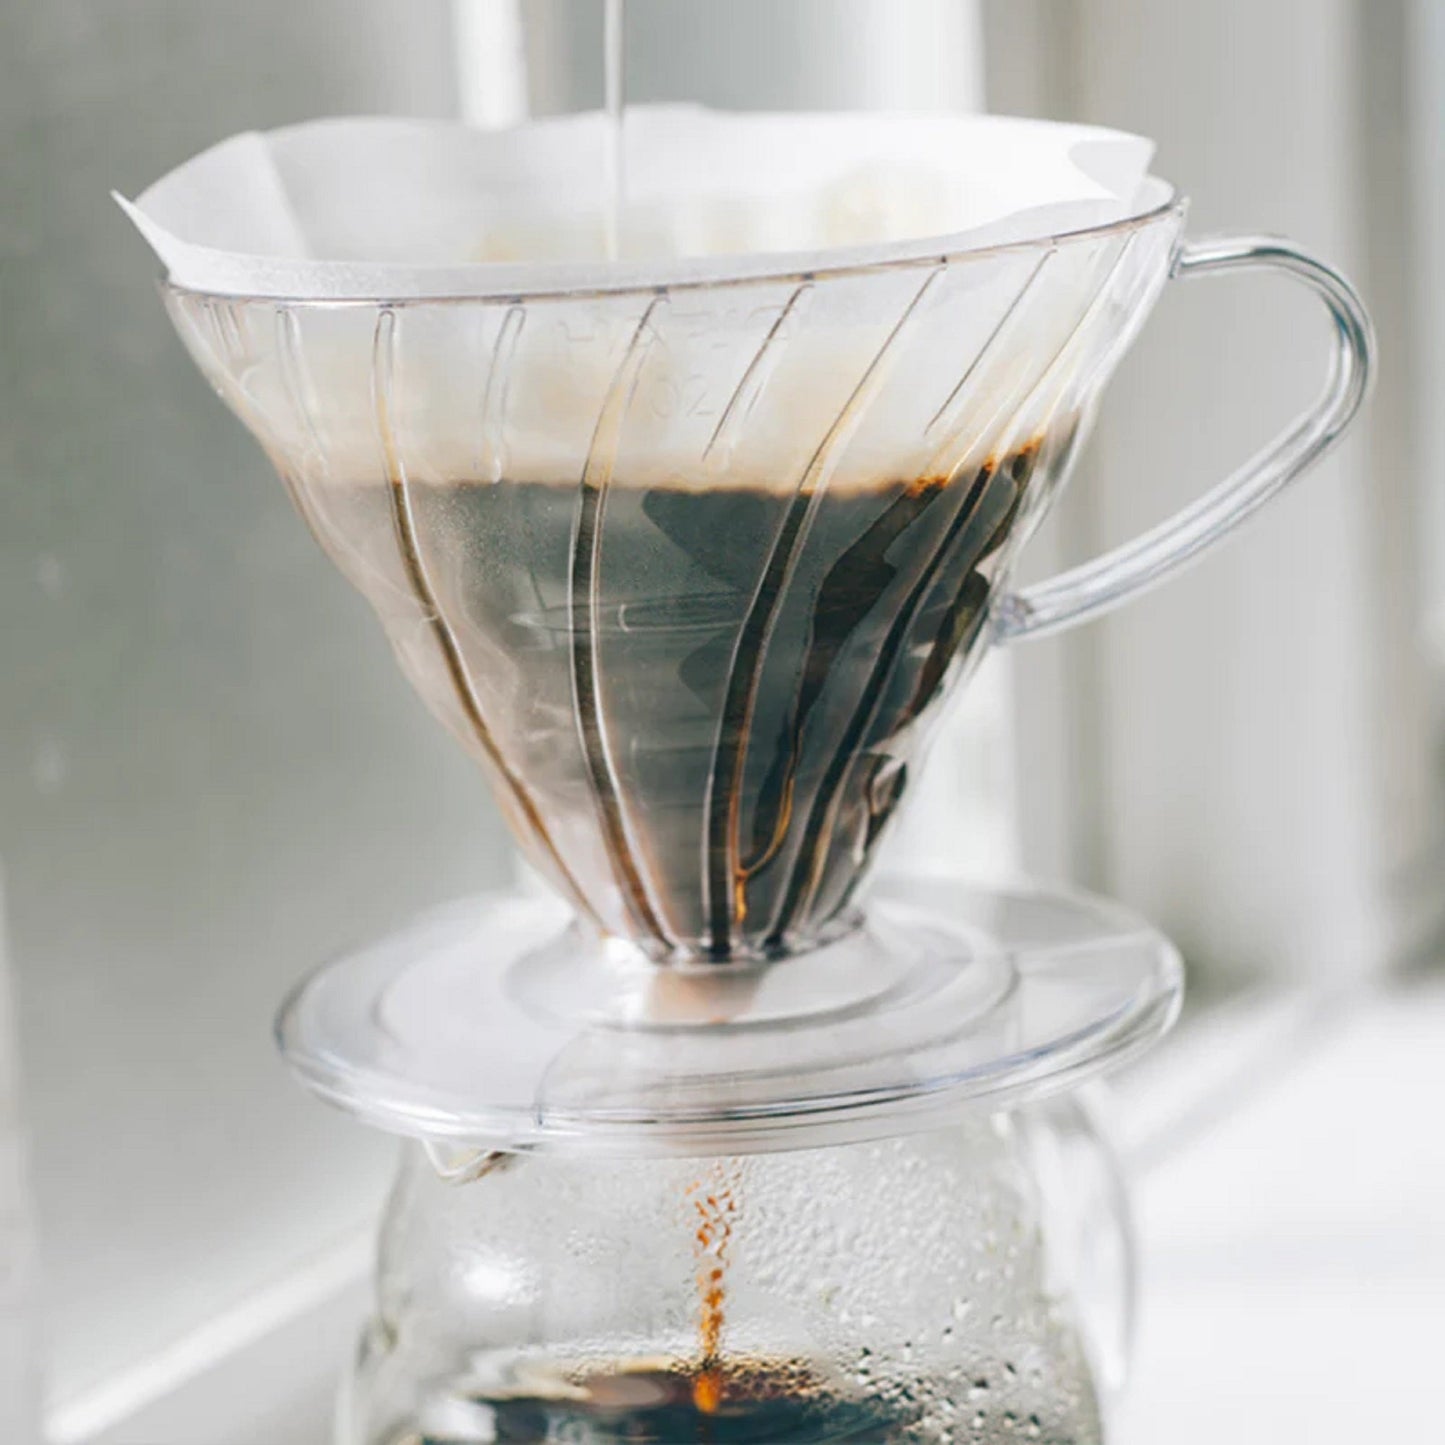 Load image into Gallery viewer, Hario V60 Dripper - Velo Coffee Roasters
